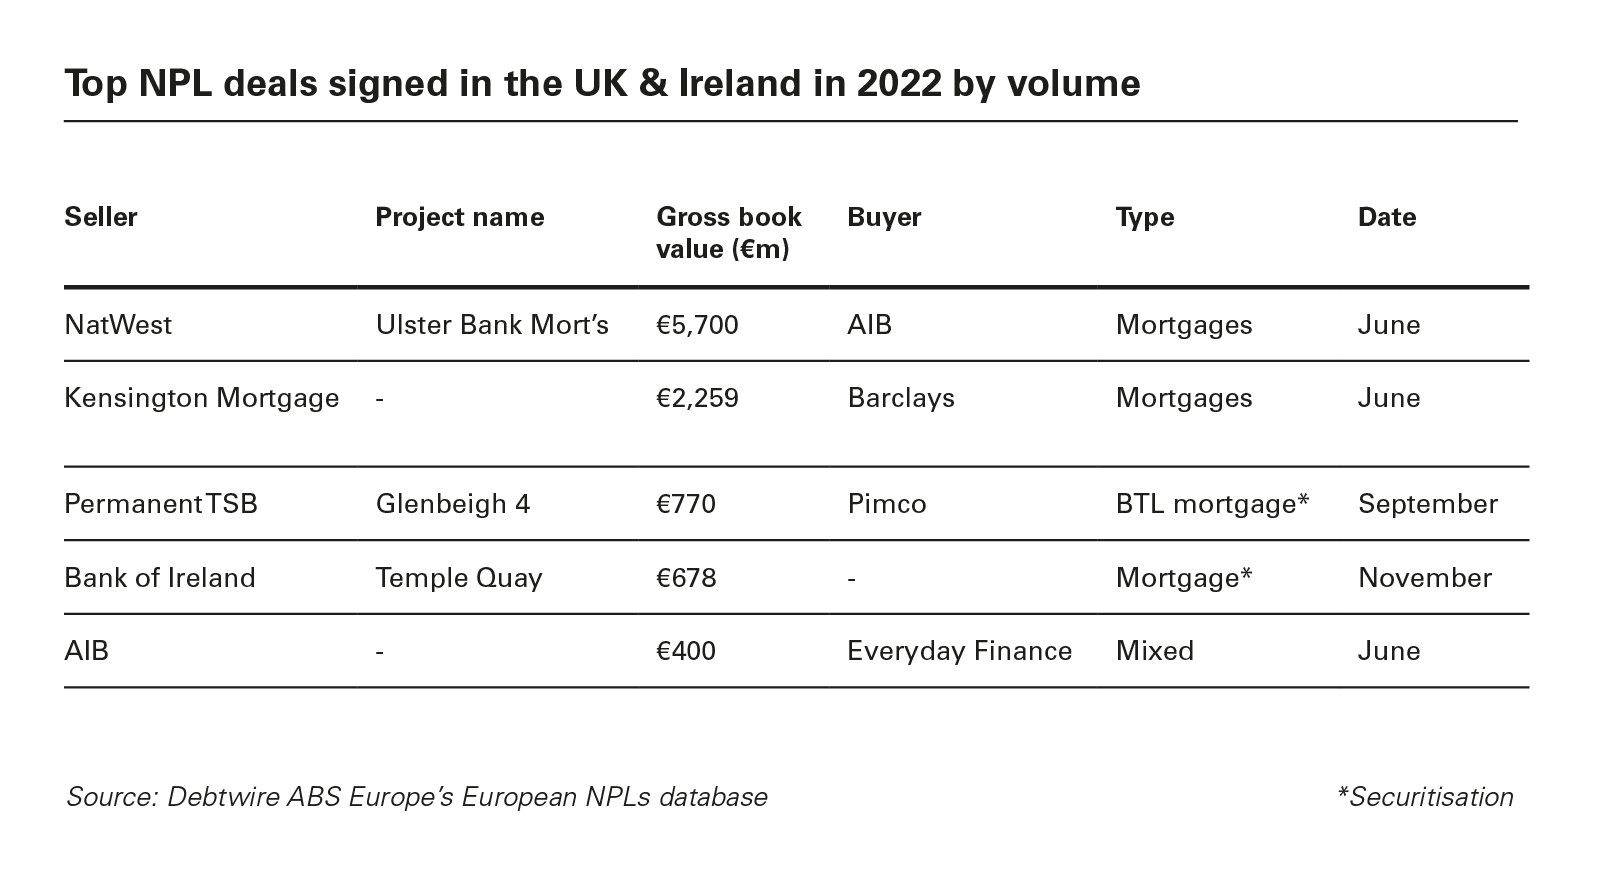 Top NPL deals signed in the UK & Ireland in 2022 by volume